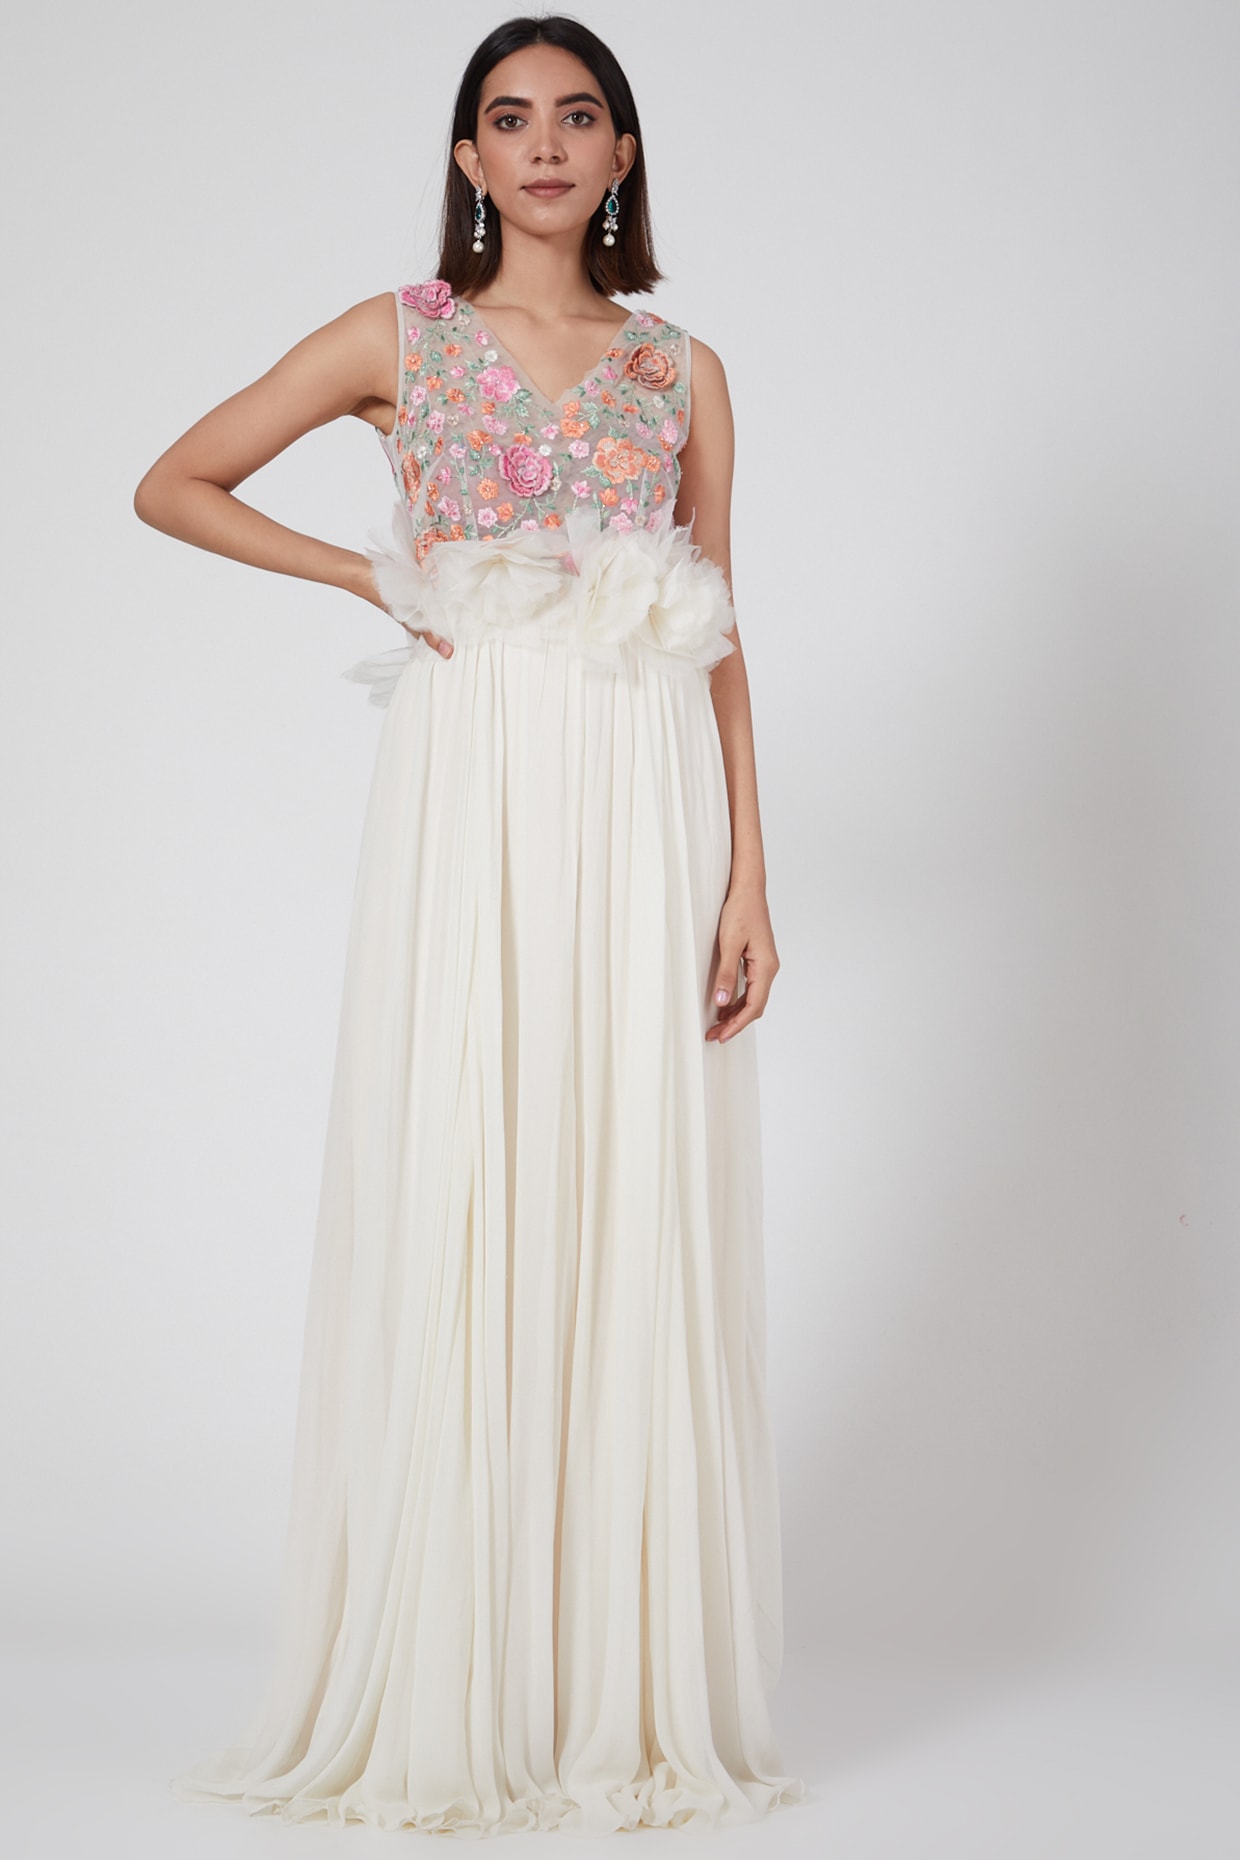 Buy Crystal Cowl Style Latest Indo Western Gown at Blush Pink Clothing